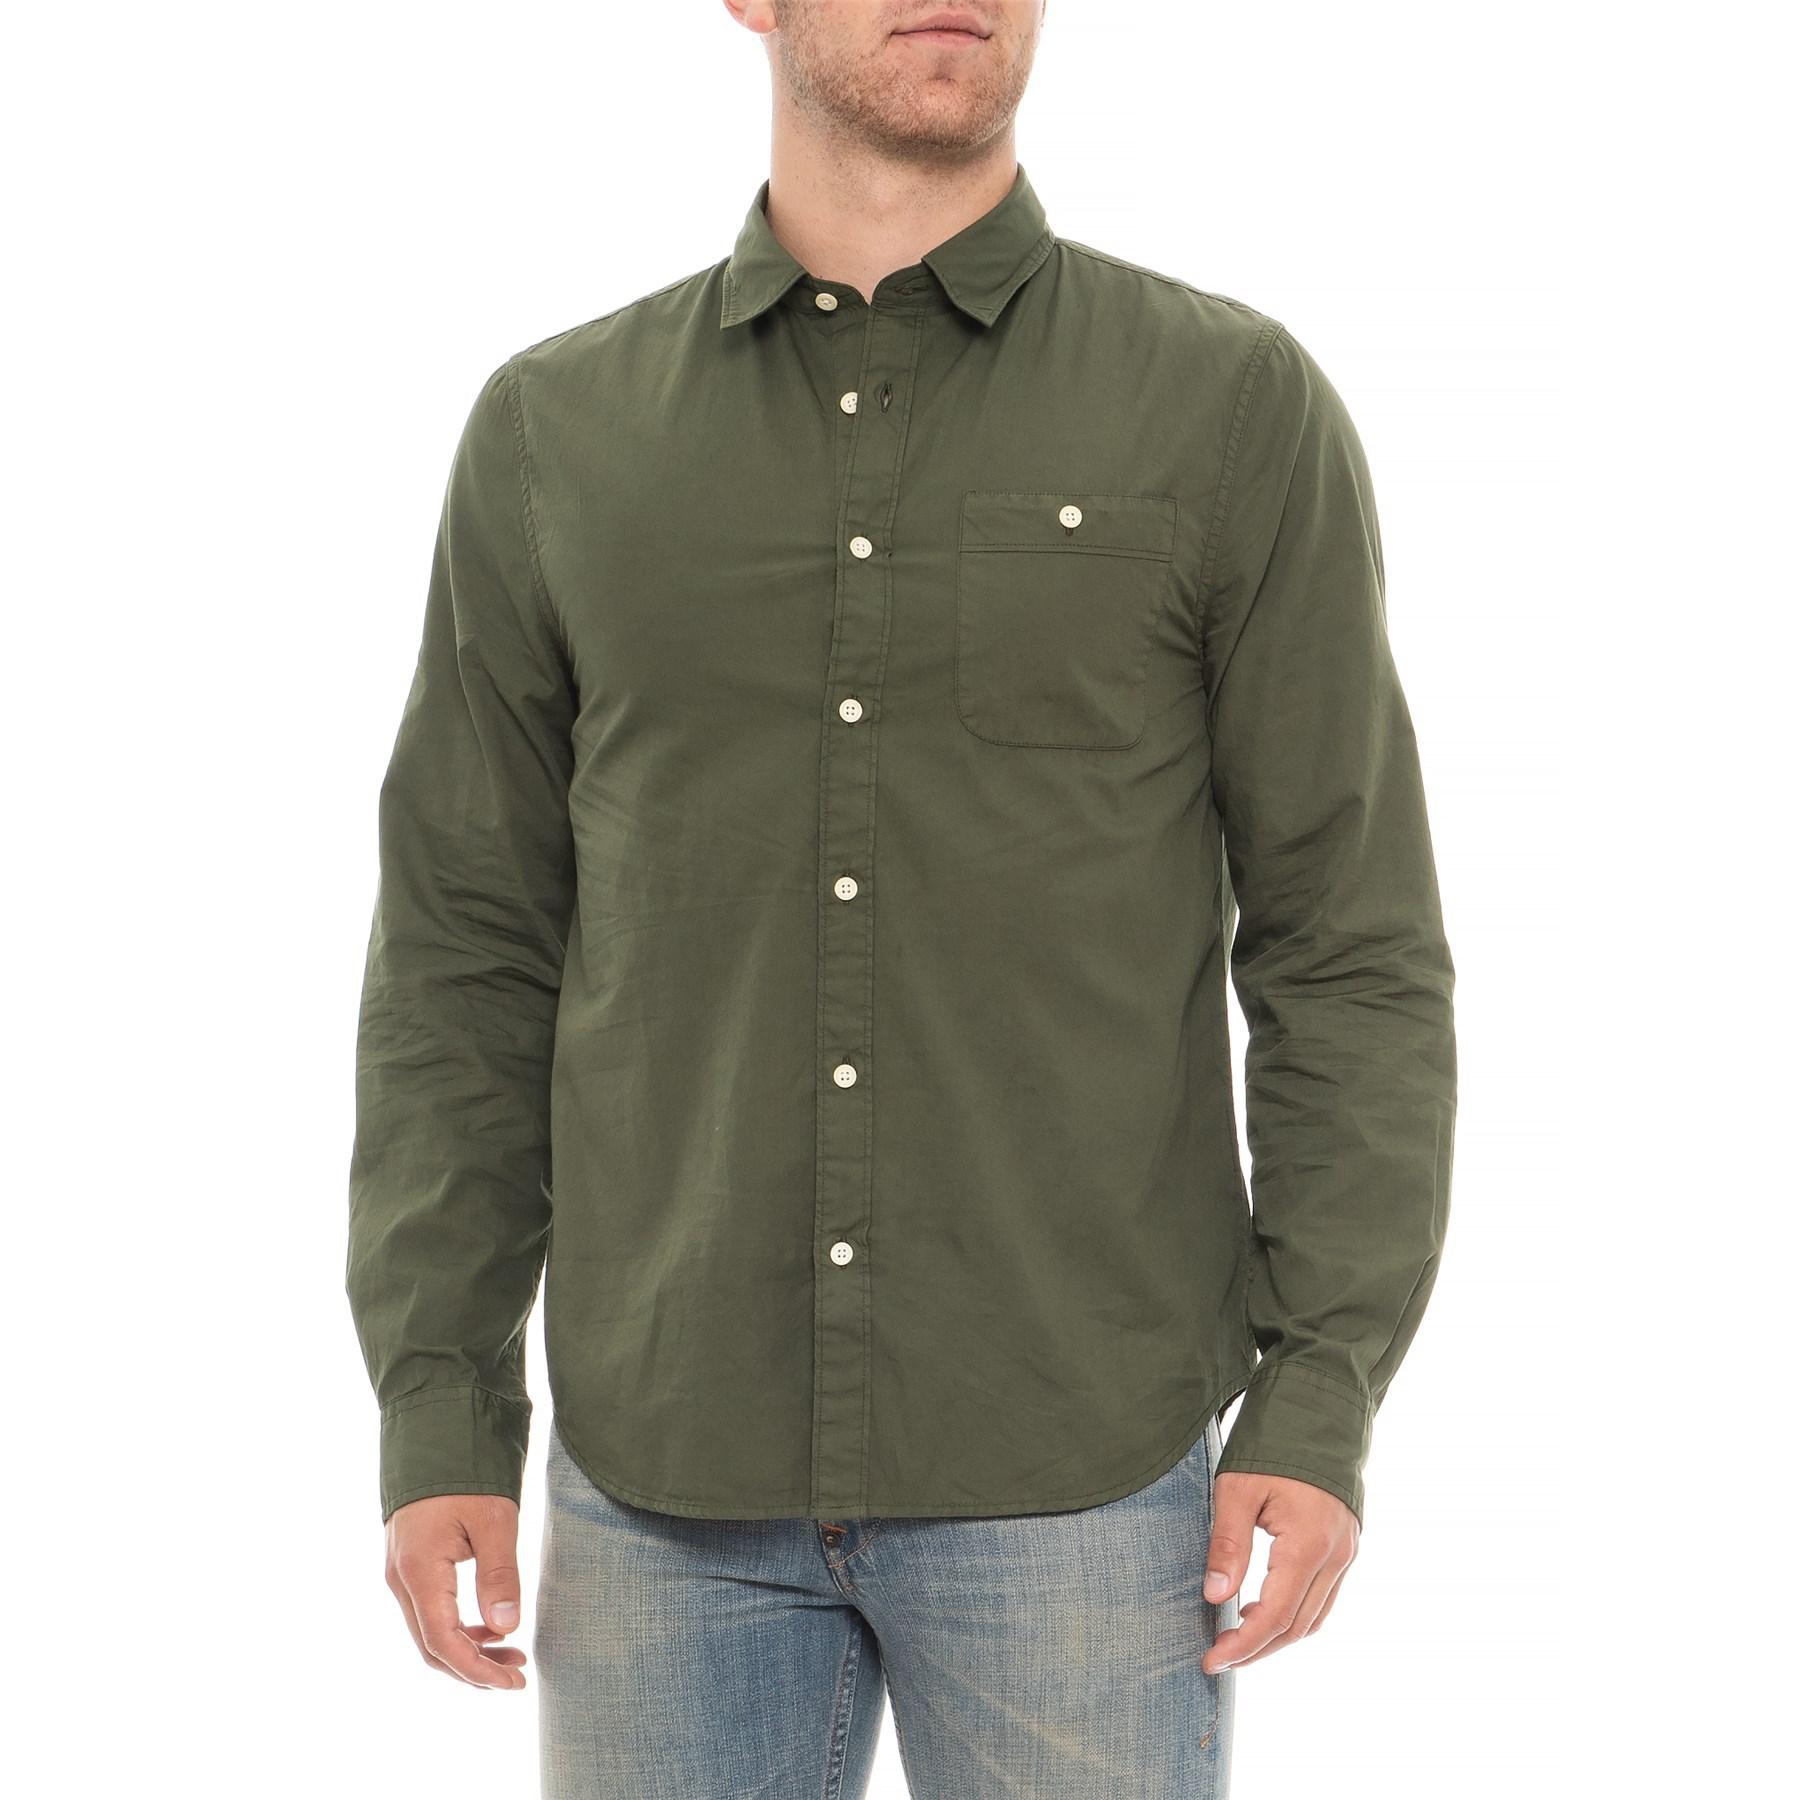 Threads For Thought Army Poplin Shirt in Green for Men - Lyst